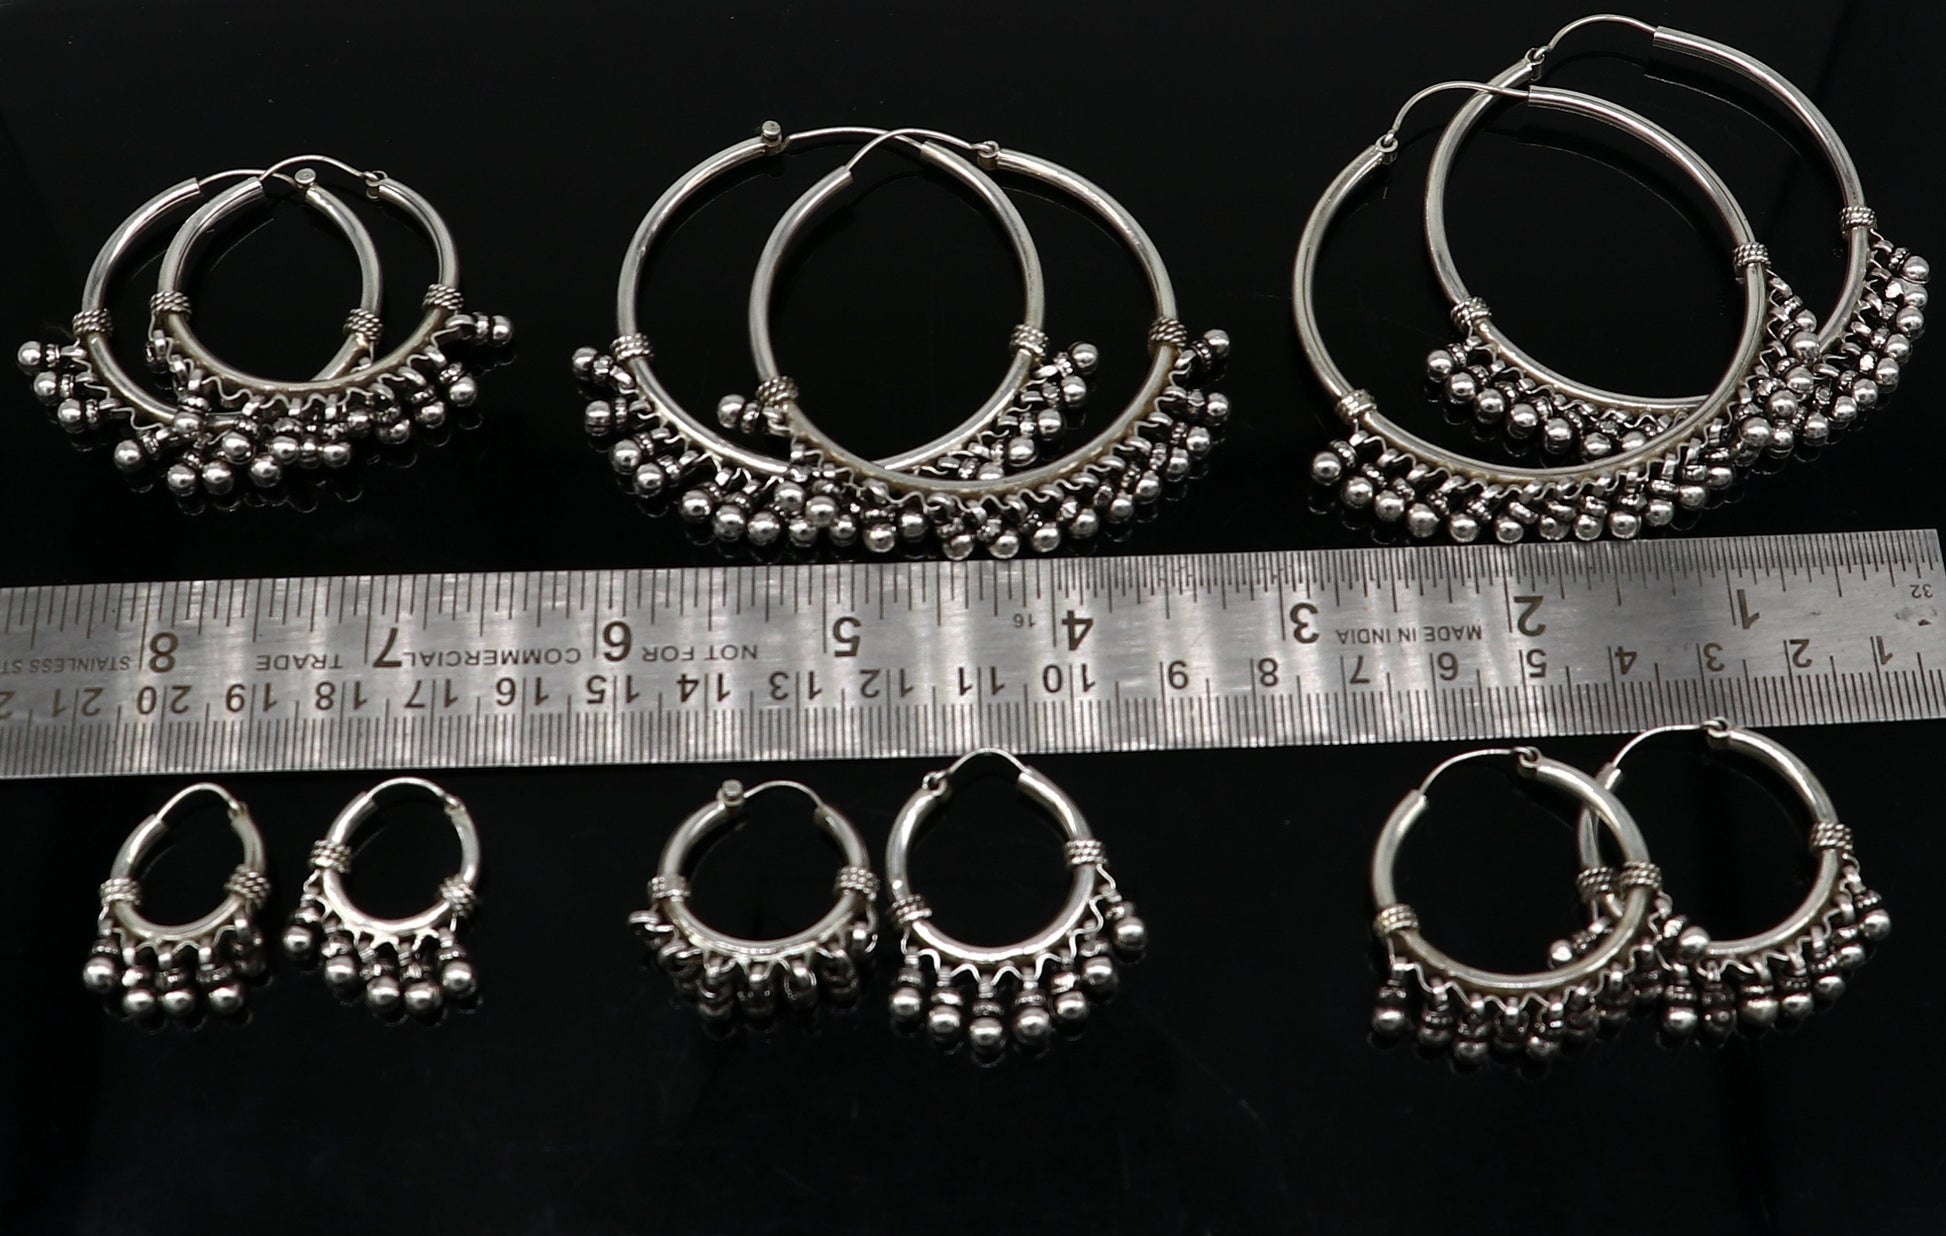 All sizes 925 sterling silver handmade hoop earring, fabulous Bali pair, silver hook, hoop gifting gorgeous tribal customized jewelry s1200 - TRIBAL ORNAMENTS